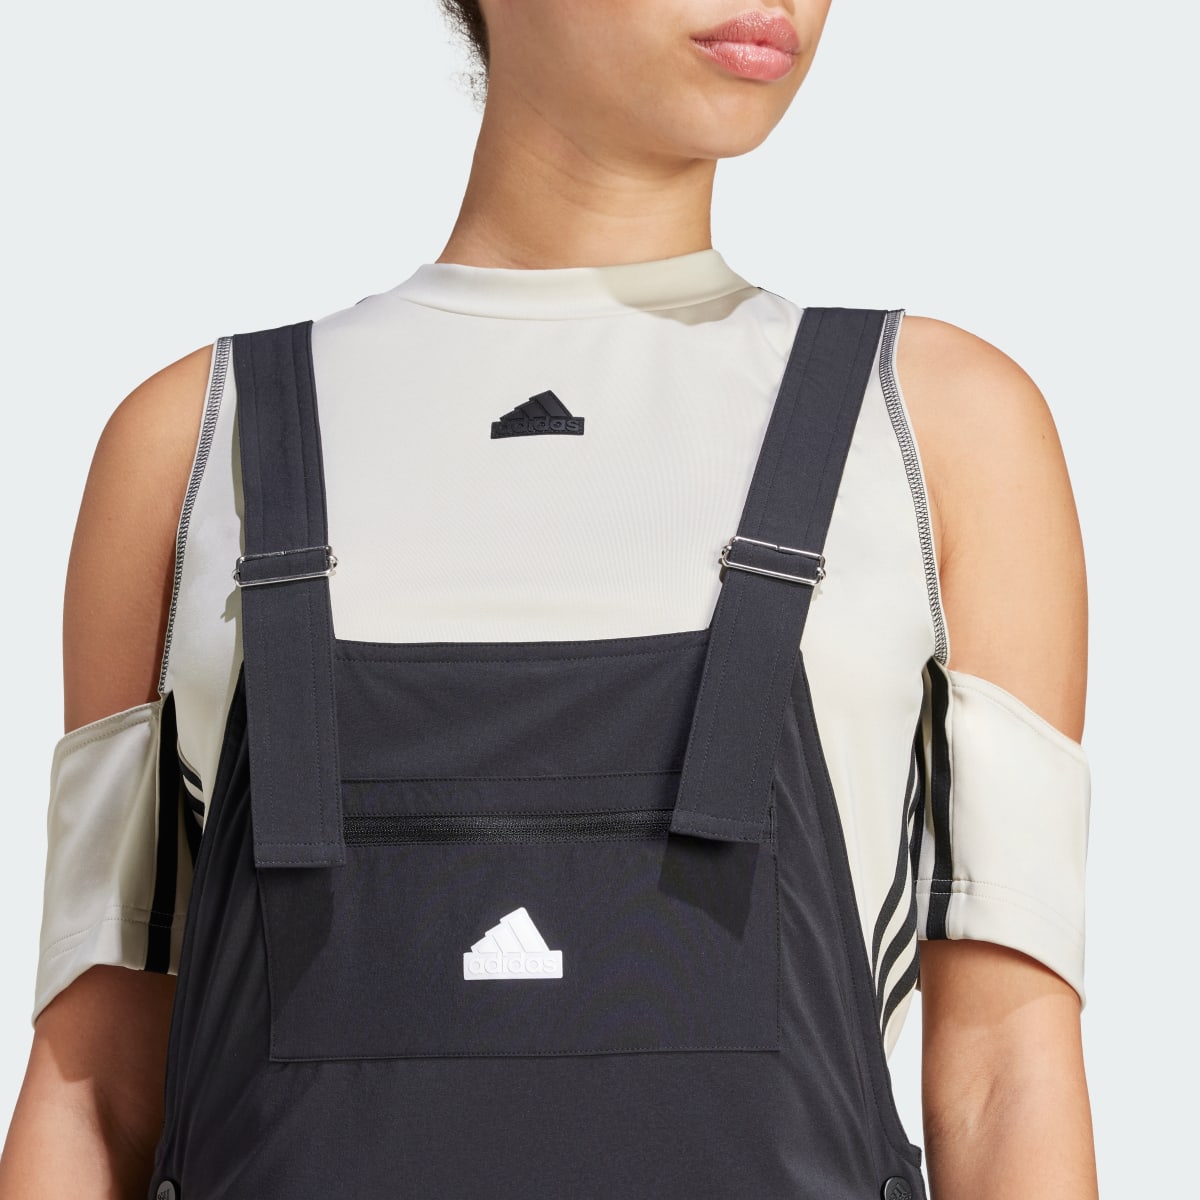 Adidas Dance All-Gender Woven Dungarees. 5